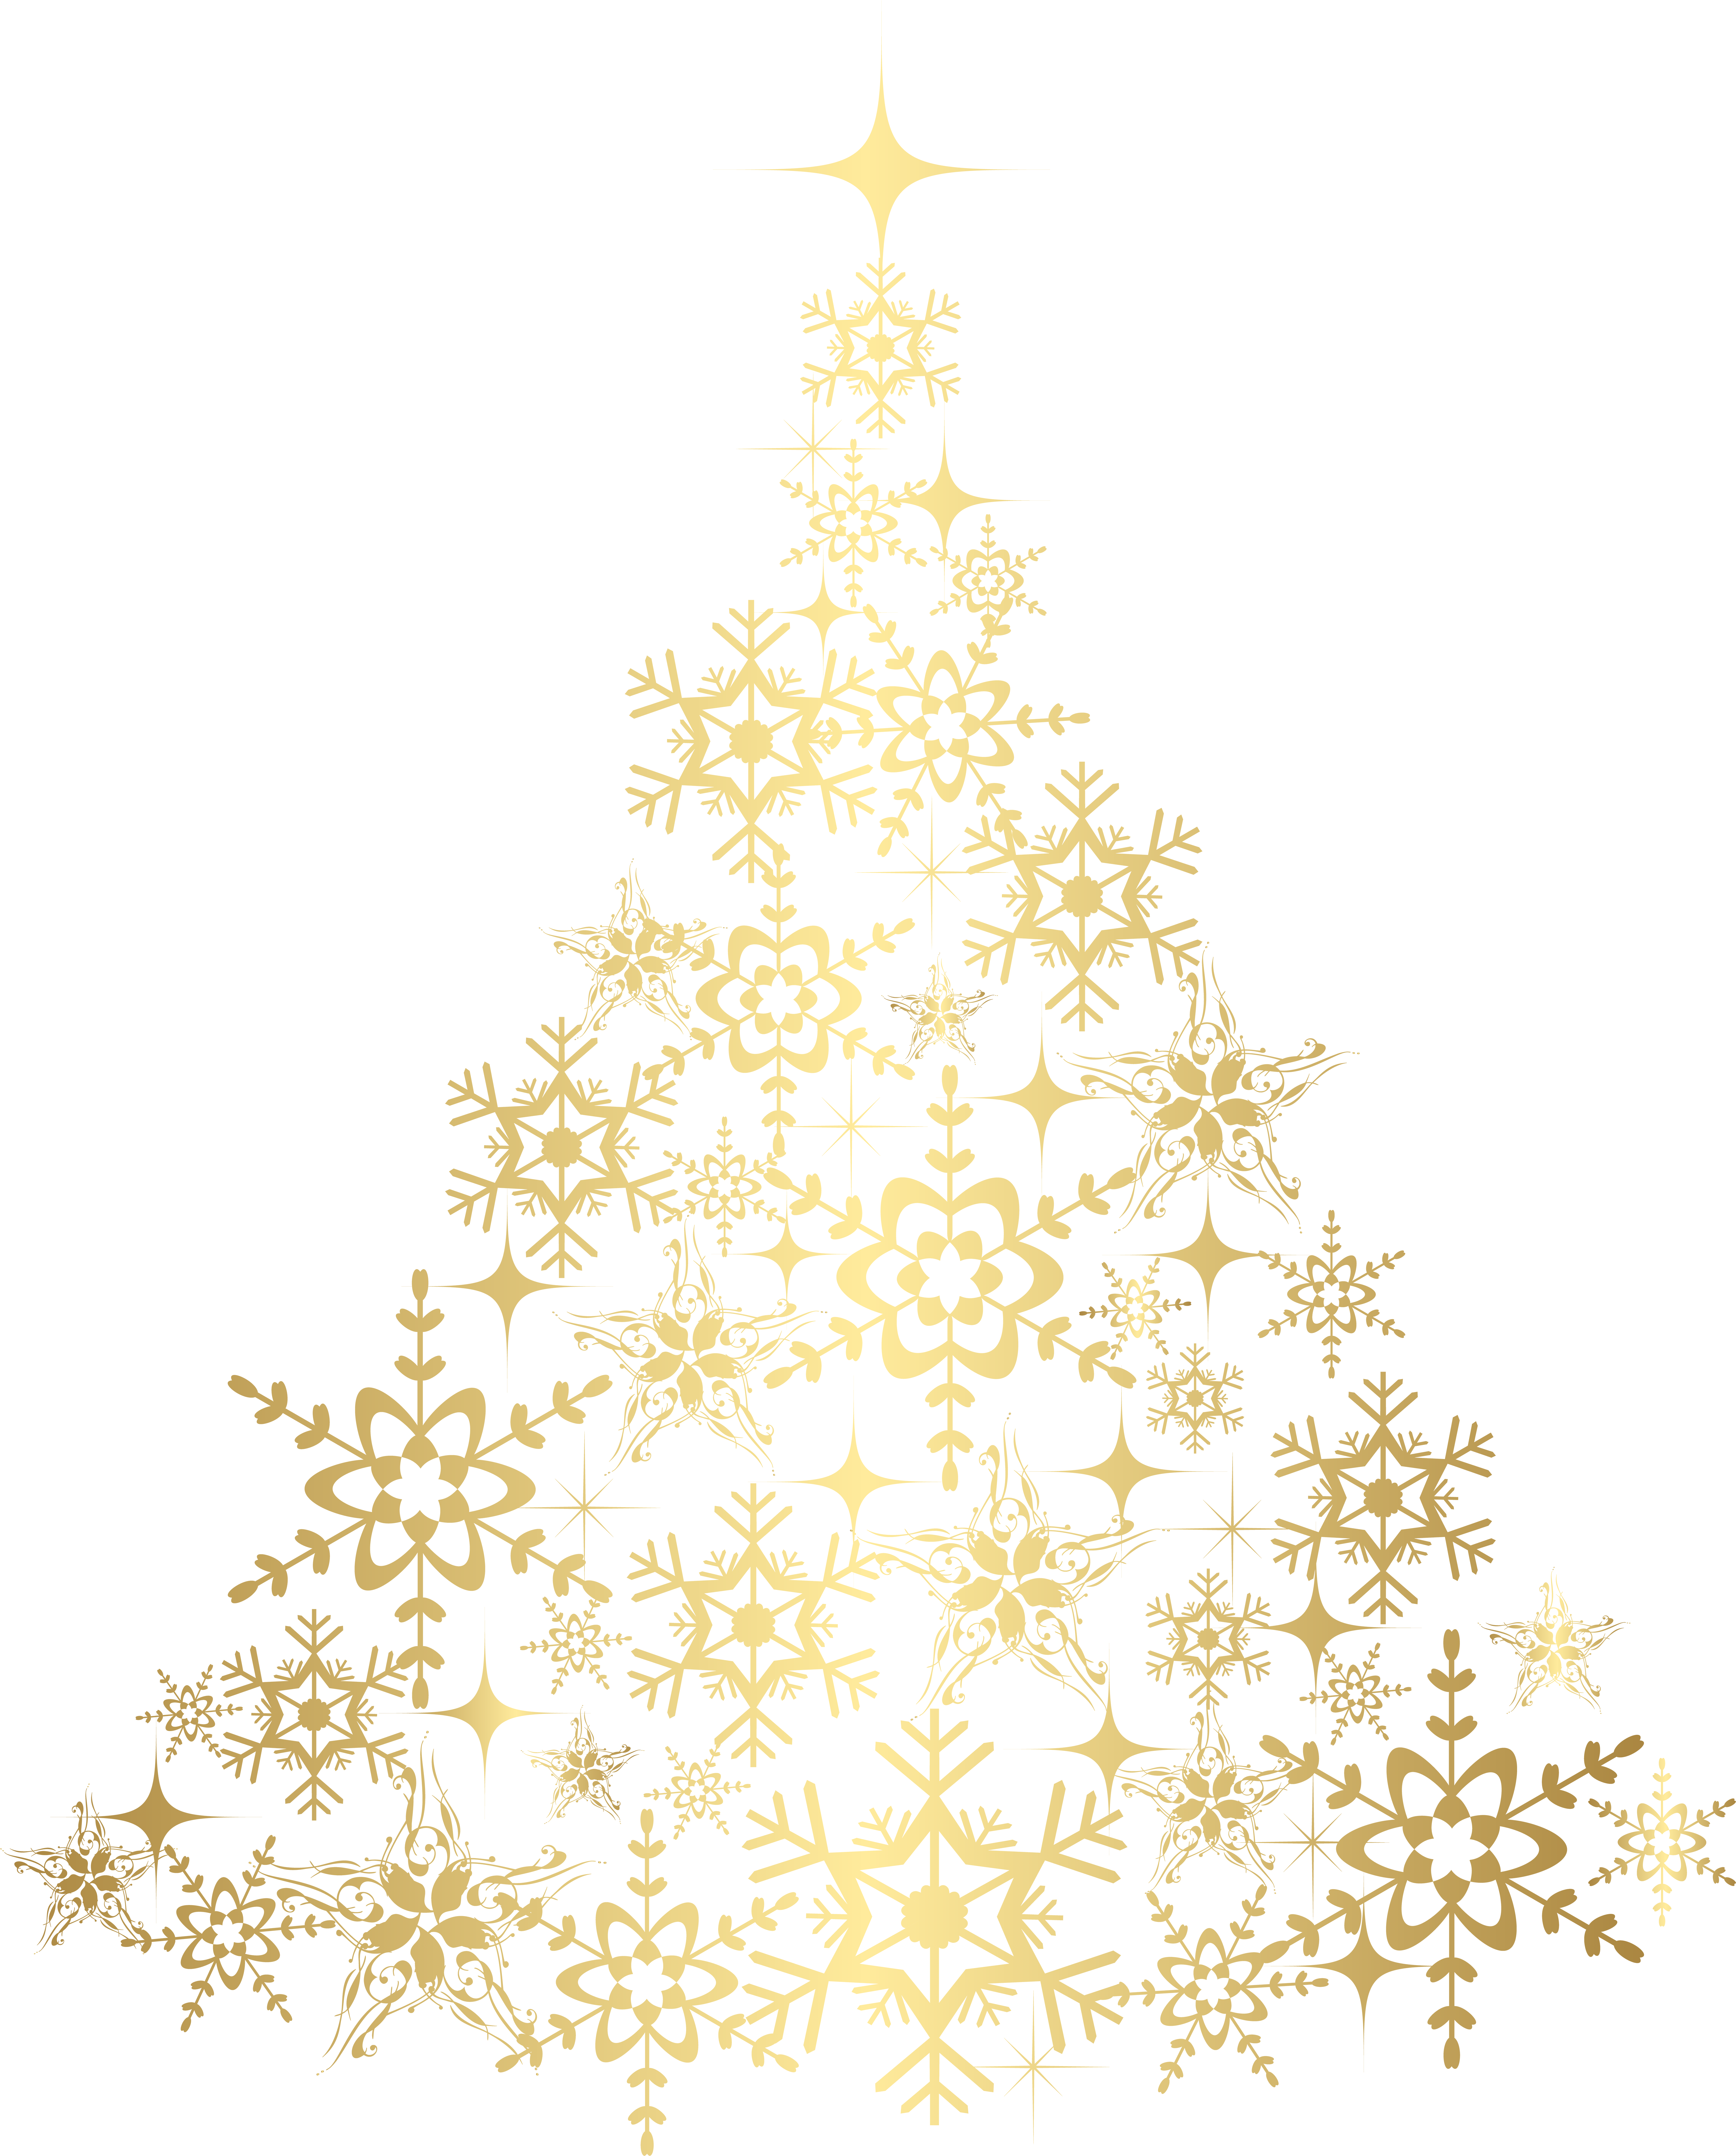 Free Gold Christmas Ornaments Png, Download Free Clip Art.